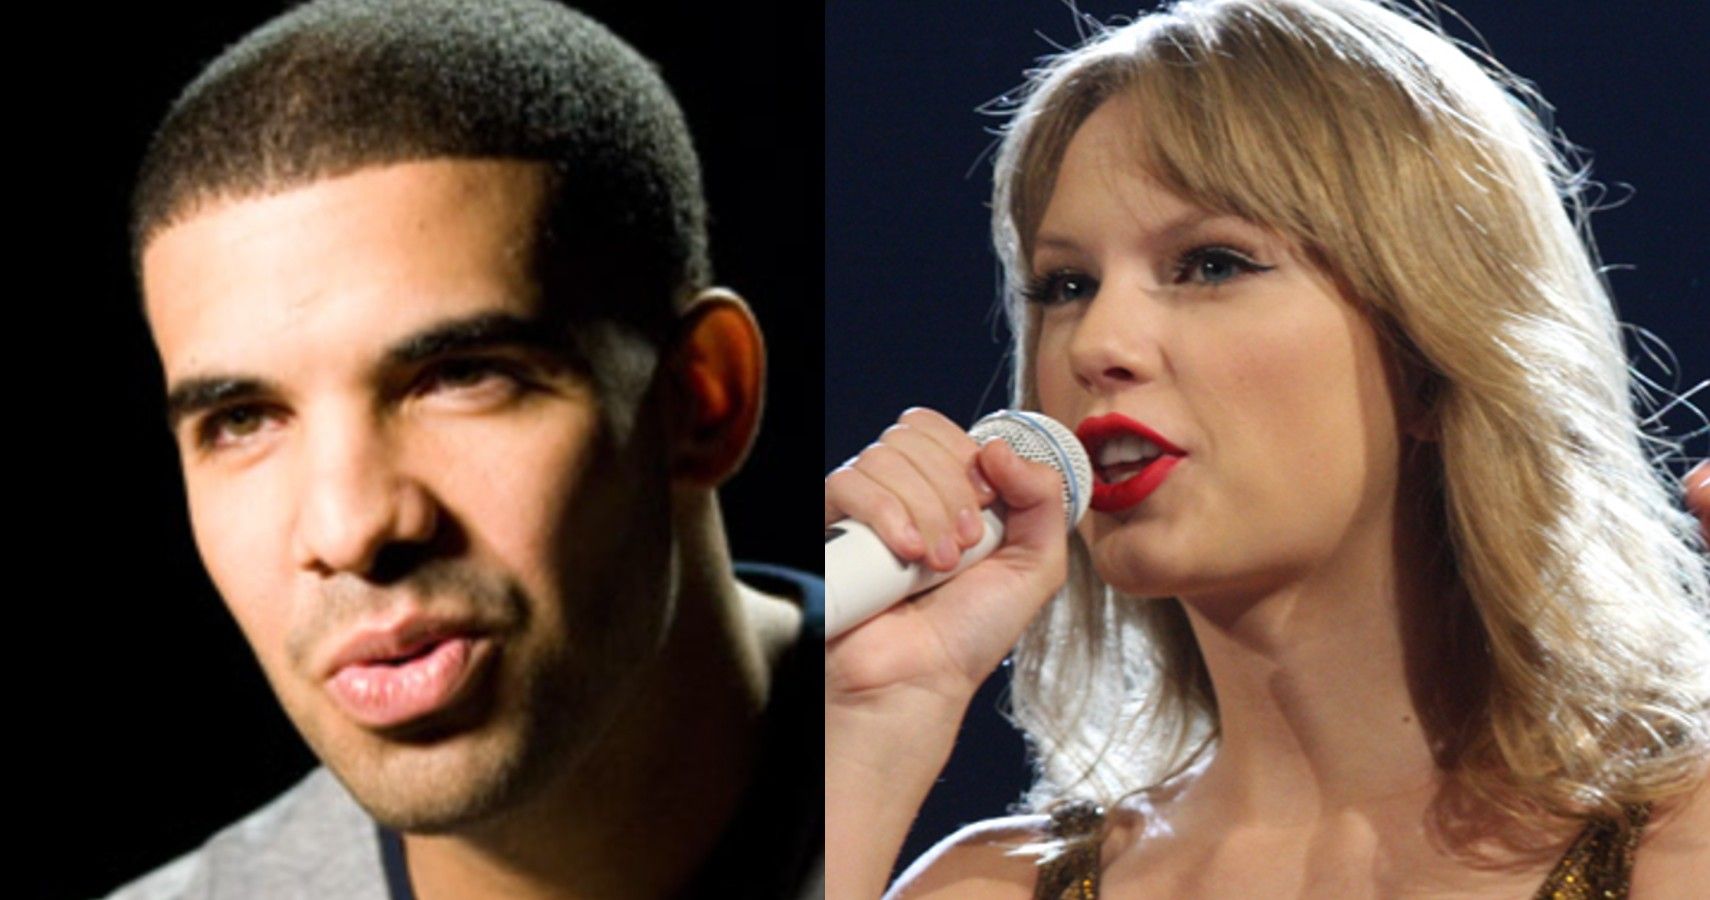  Drake & Taylor Swift Appear To Be Collaborating On Music 